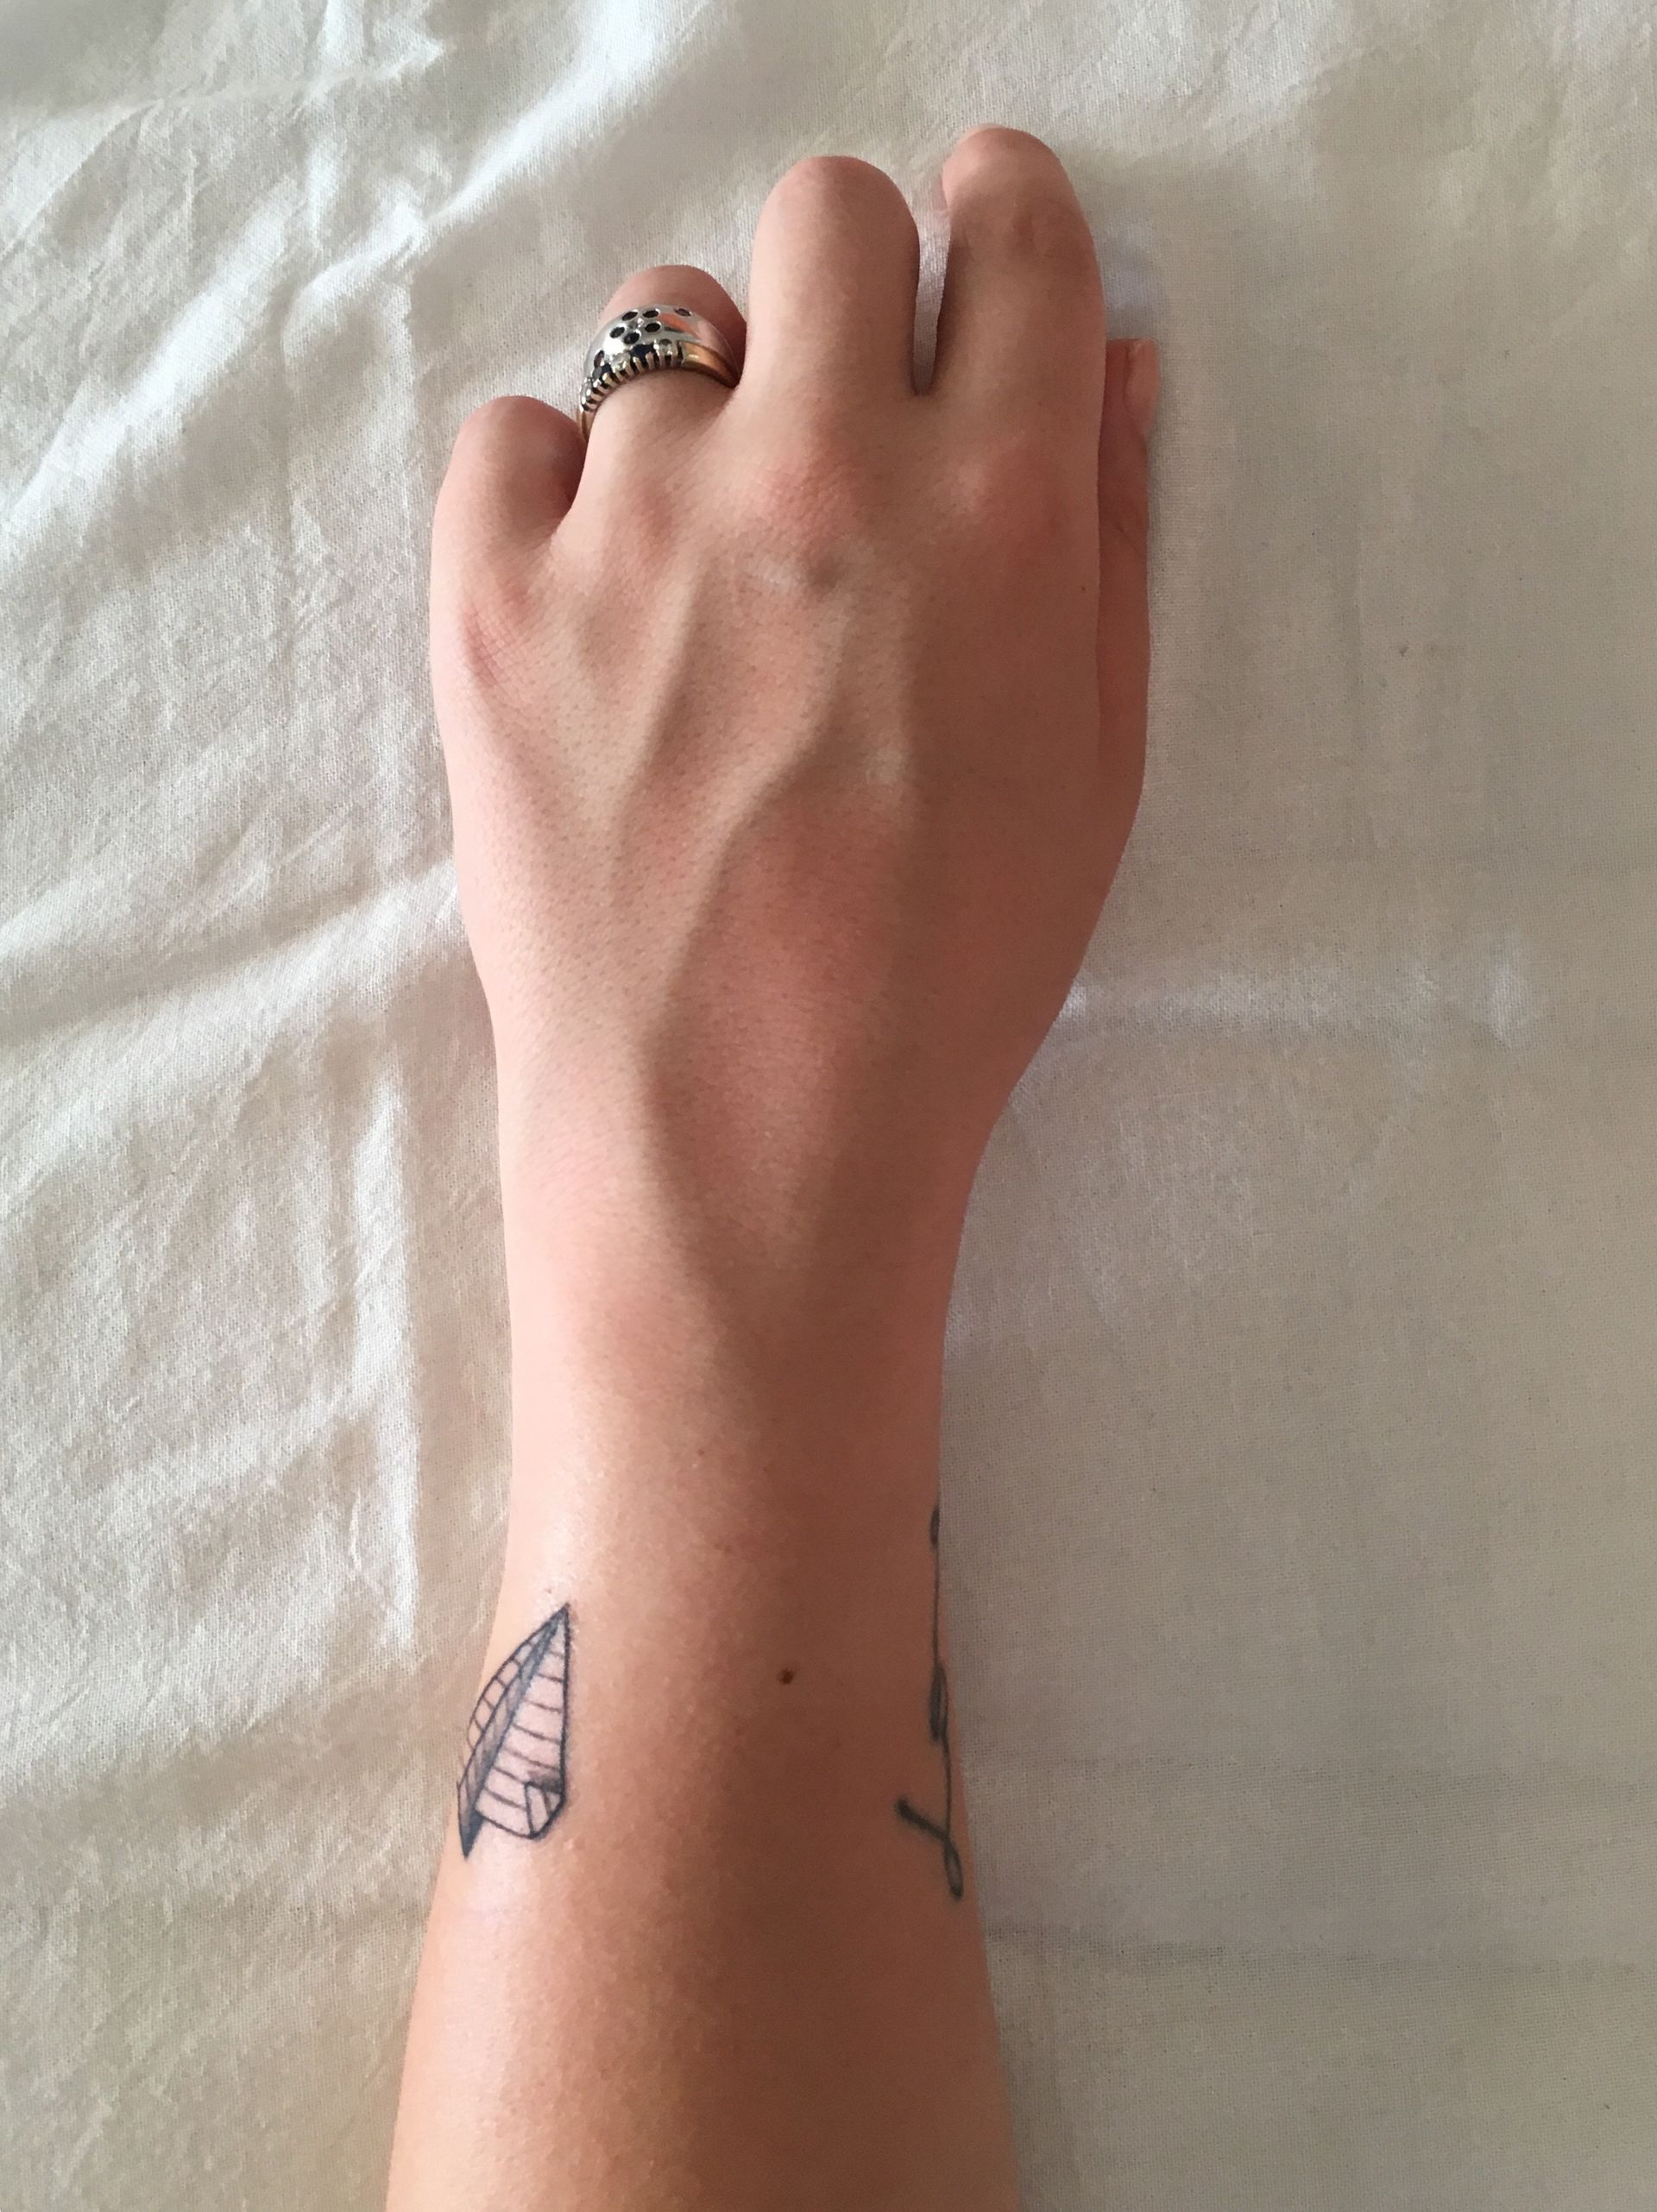 a woman 's wrist has a small tattoo of a sailboat on it